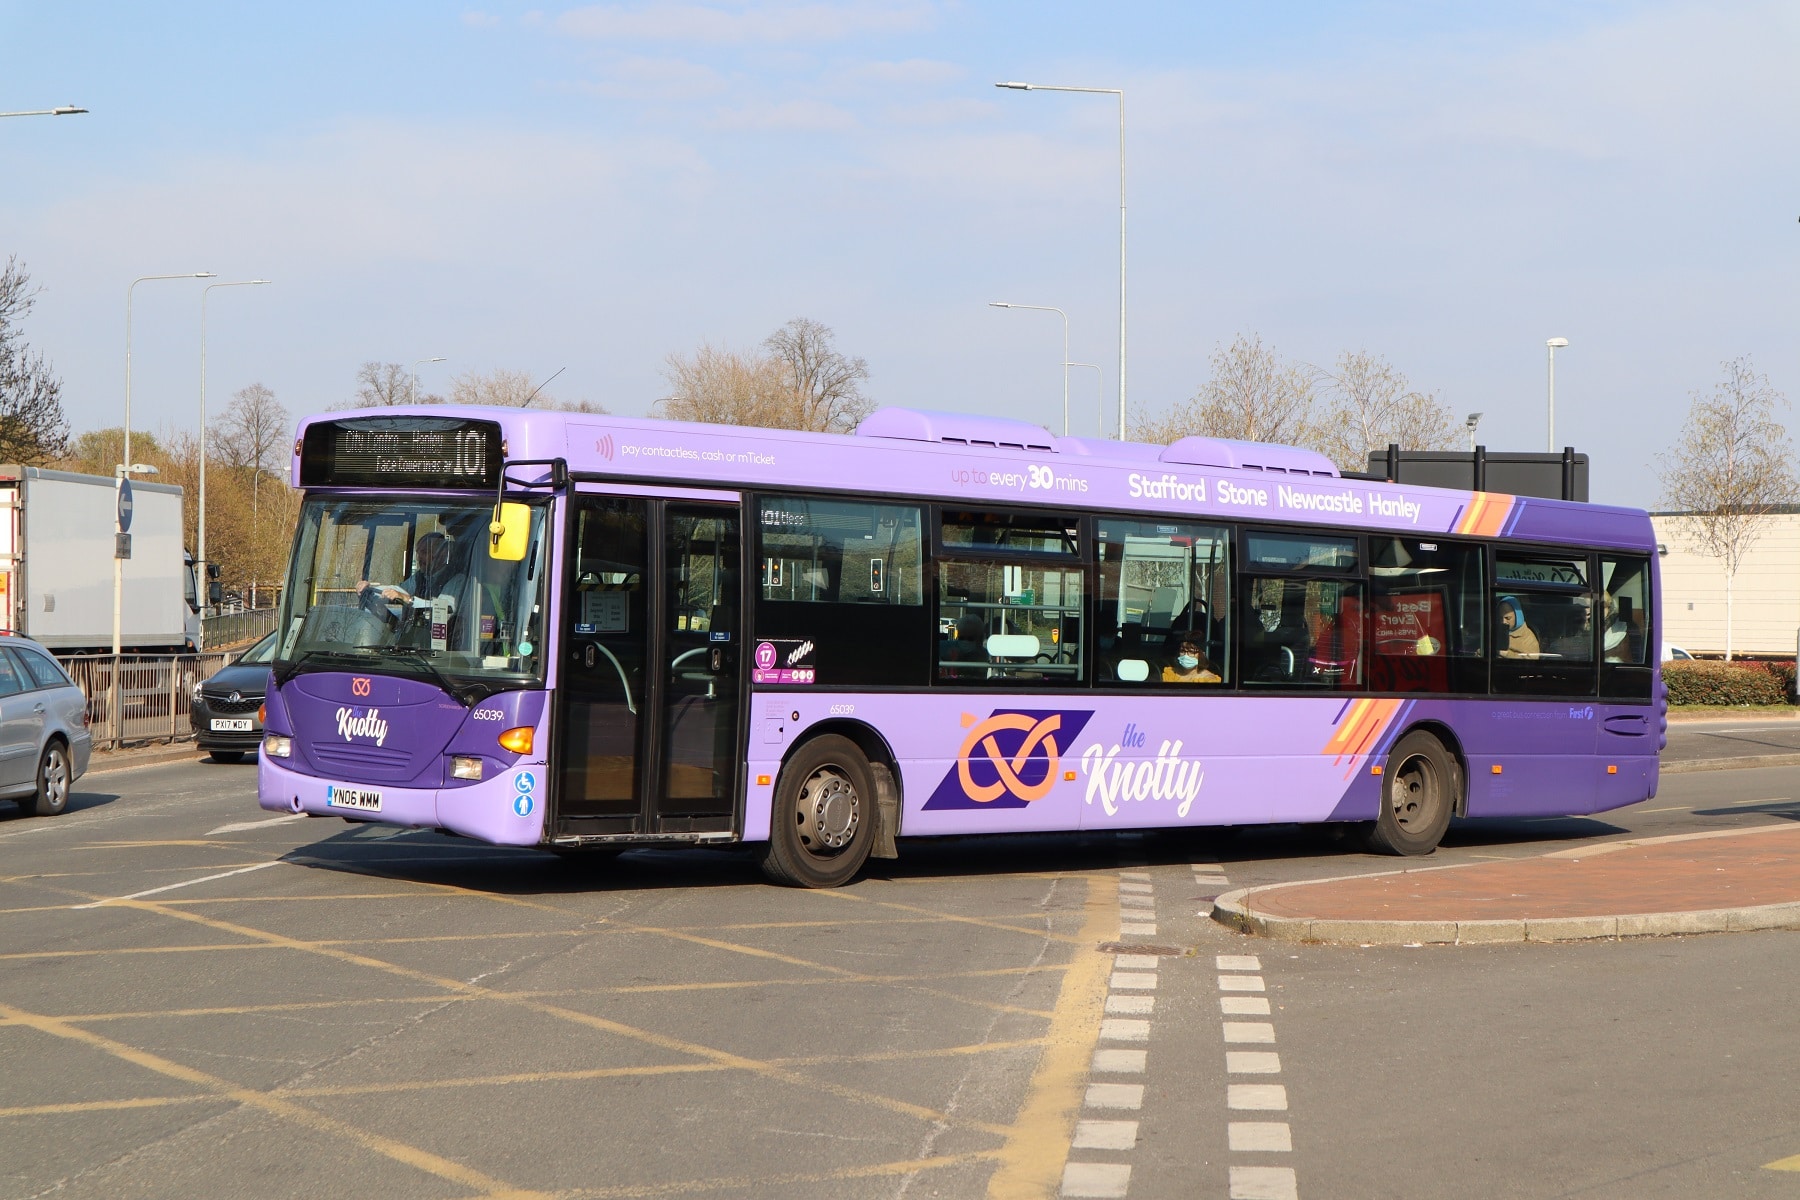 Bus Recovery Grant in England terms and conditions published